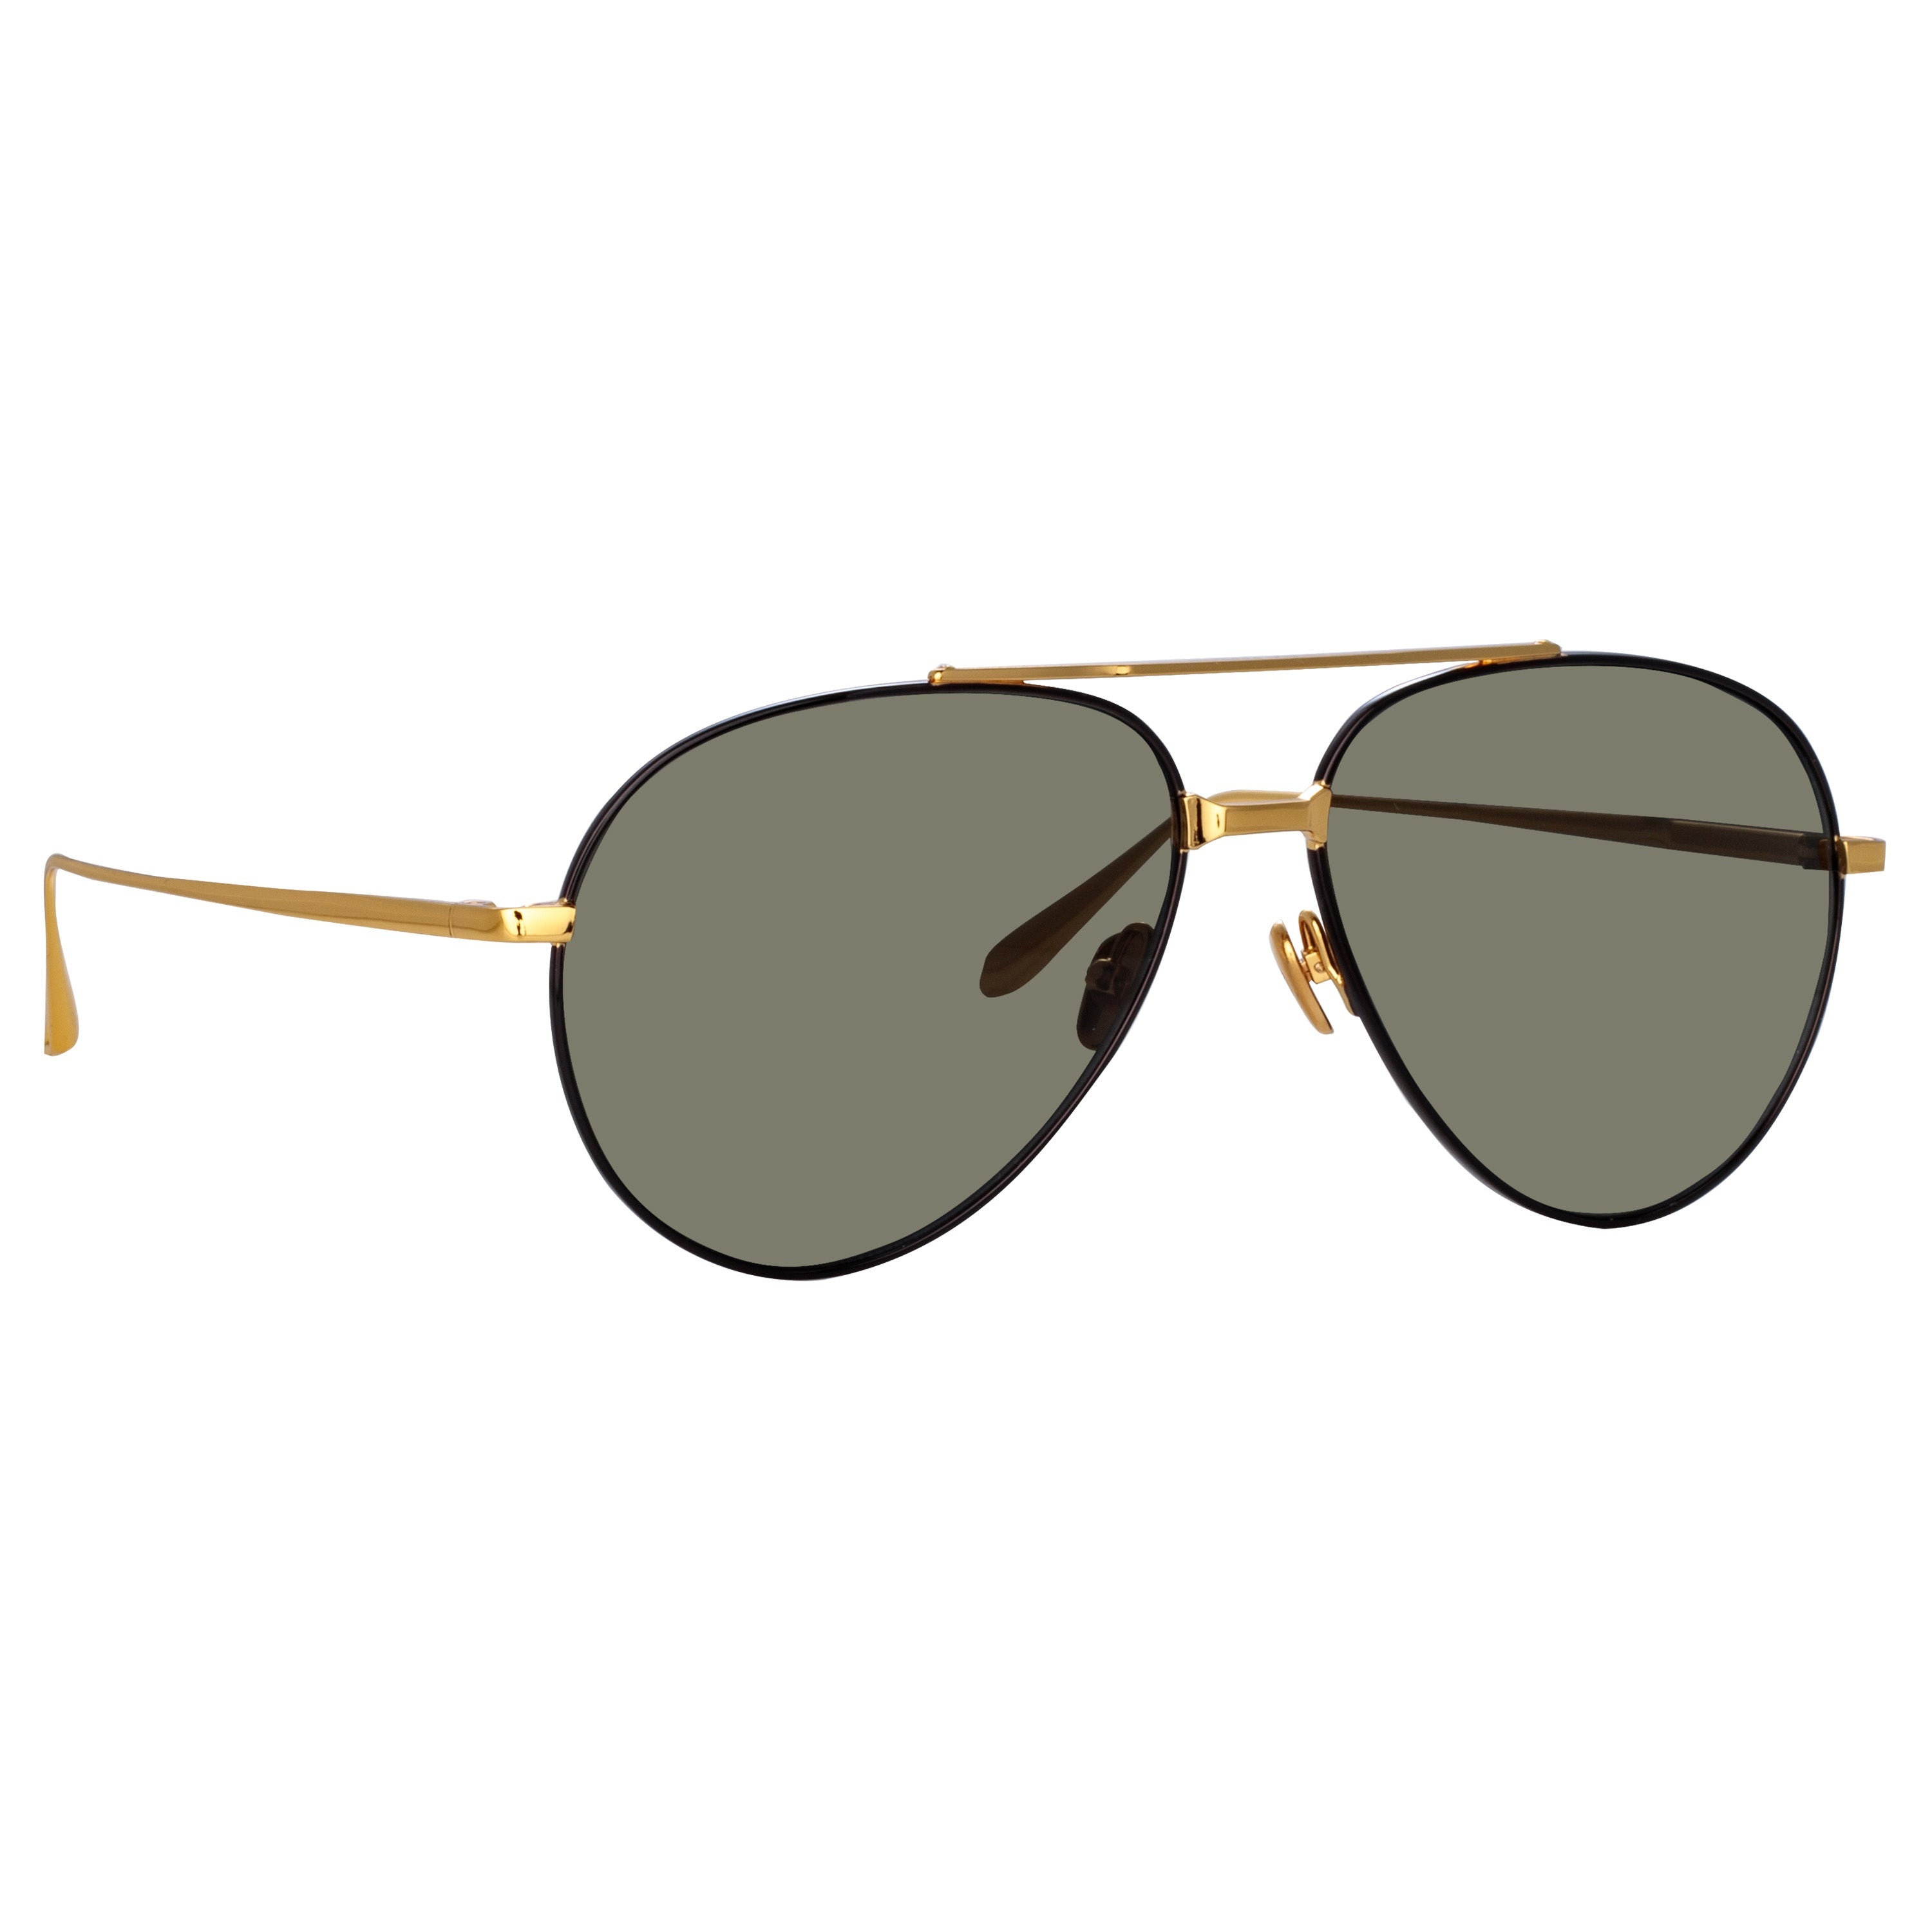 MARCELO AVIATOR SUNGLASSES IN BLACK AND YELLOW GOLD - 4